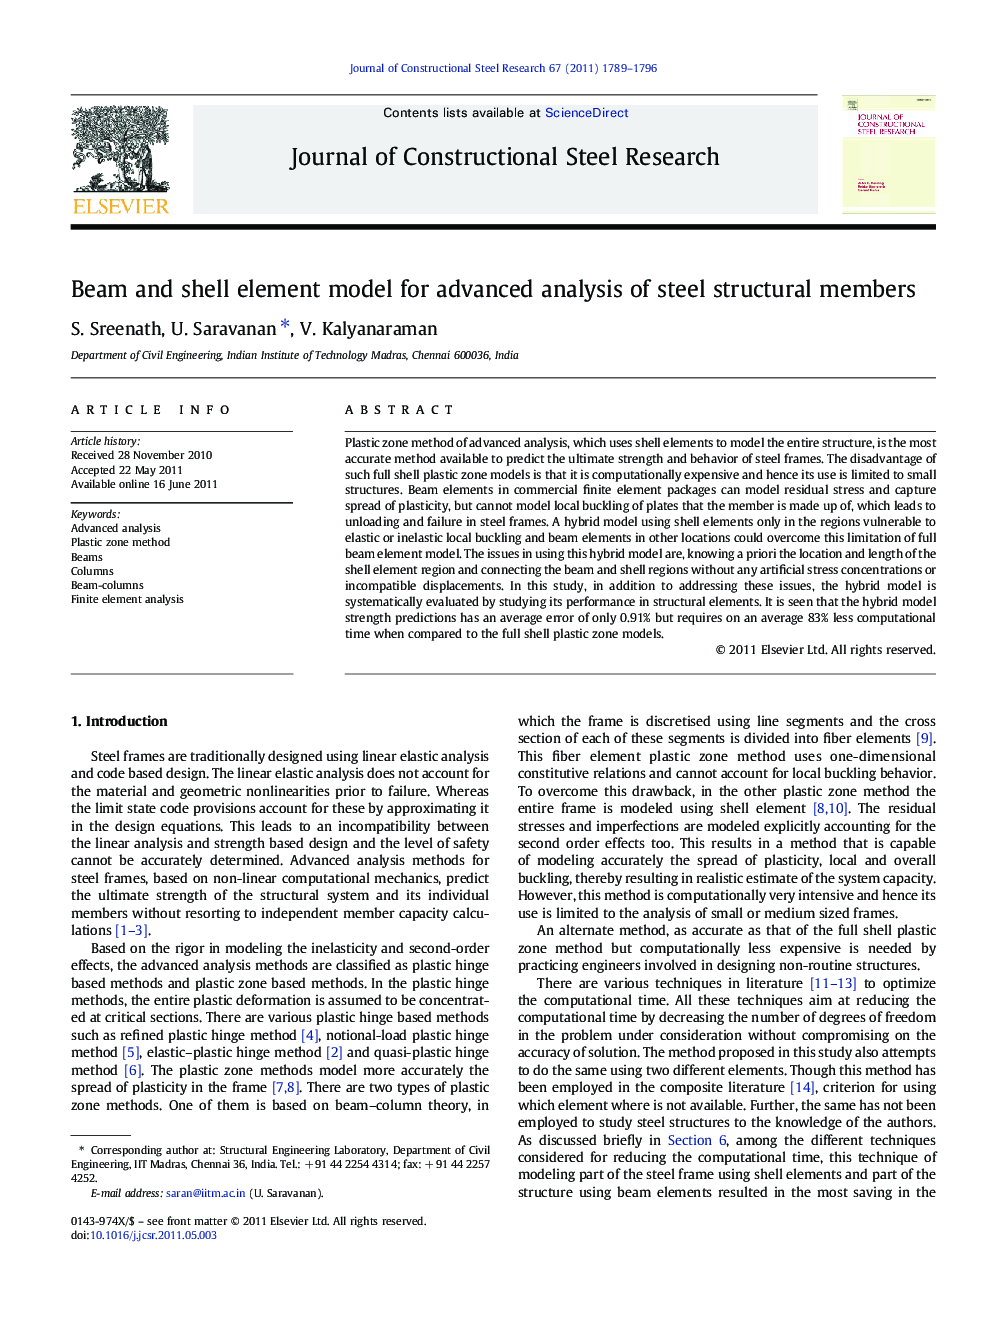 Beam and shell element model for advanced analysis of steel structural members